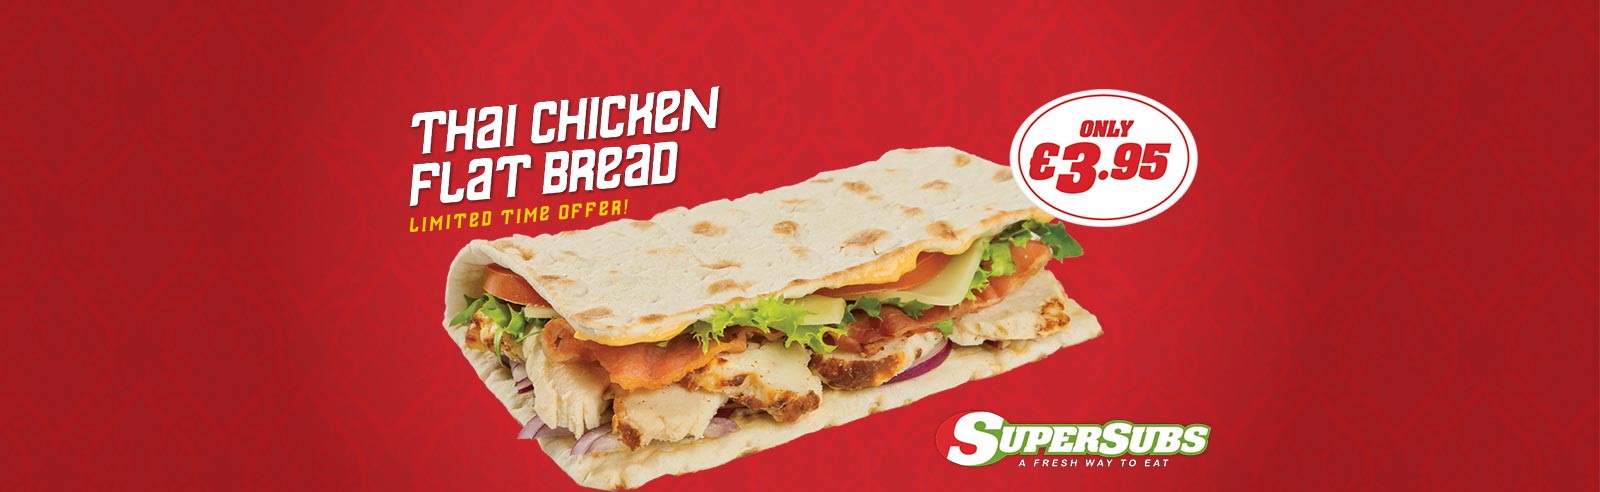 Introducing the Thai Chicken Flat Bread at SuperSubs!